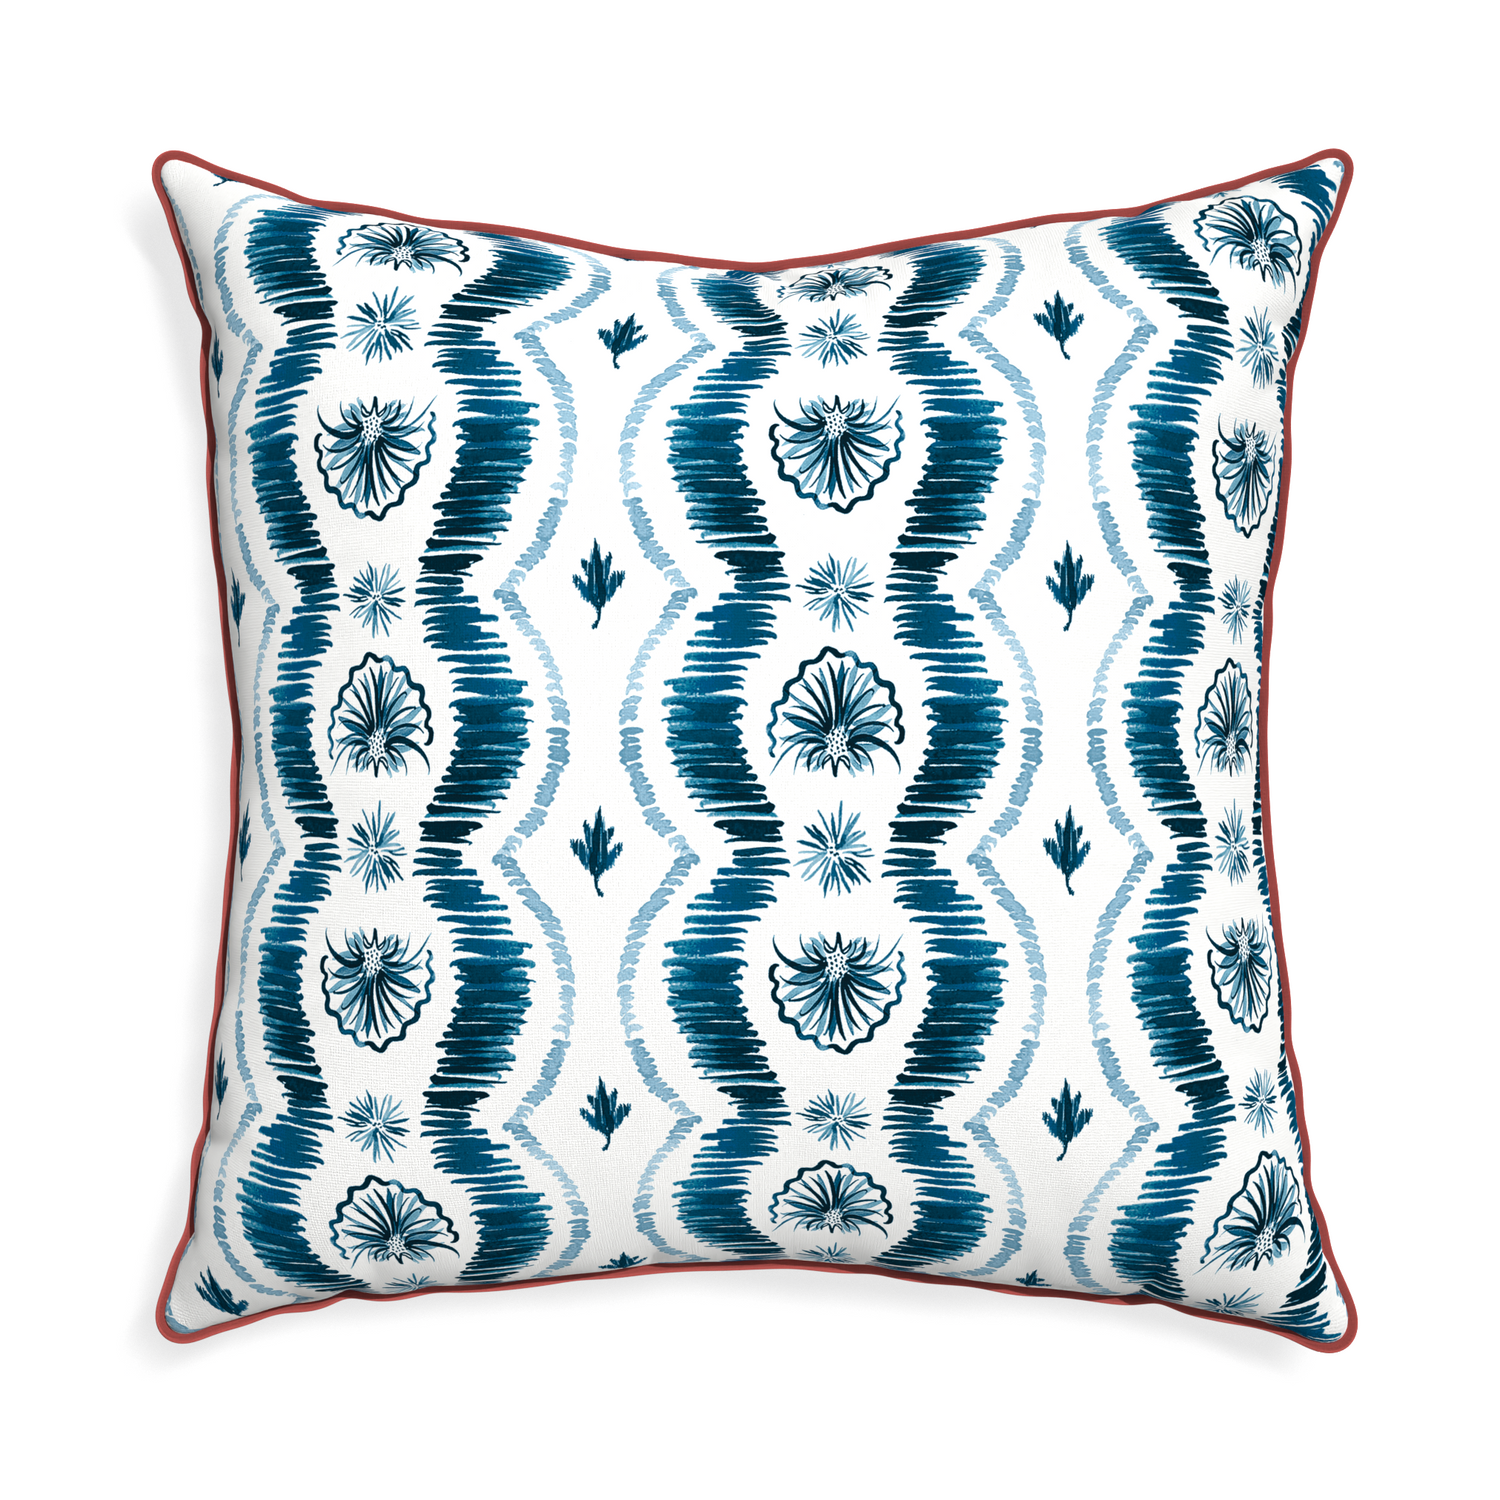 Blue Ikat Stripe Square Pillow with pink velvet piping